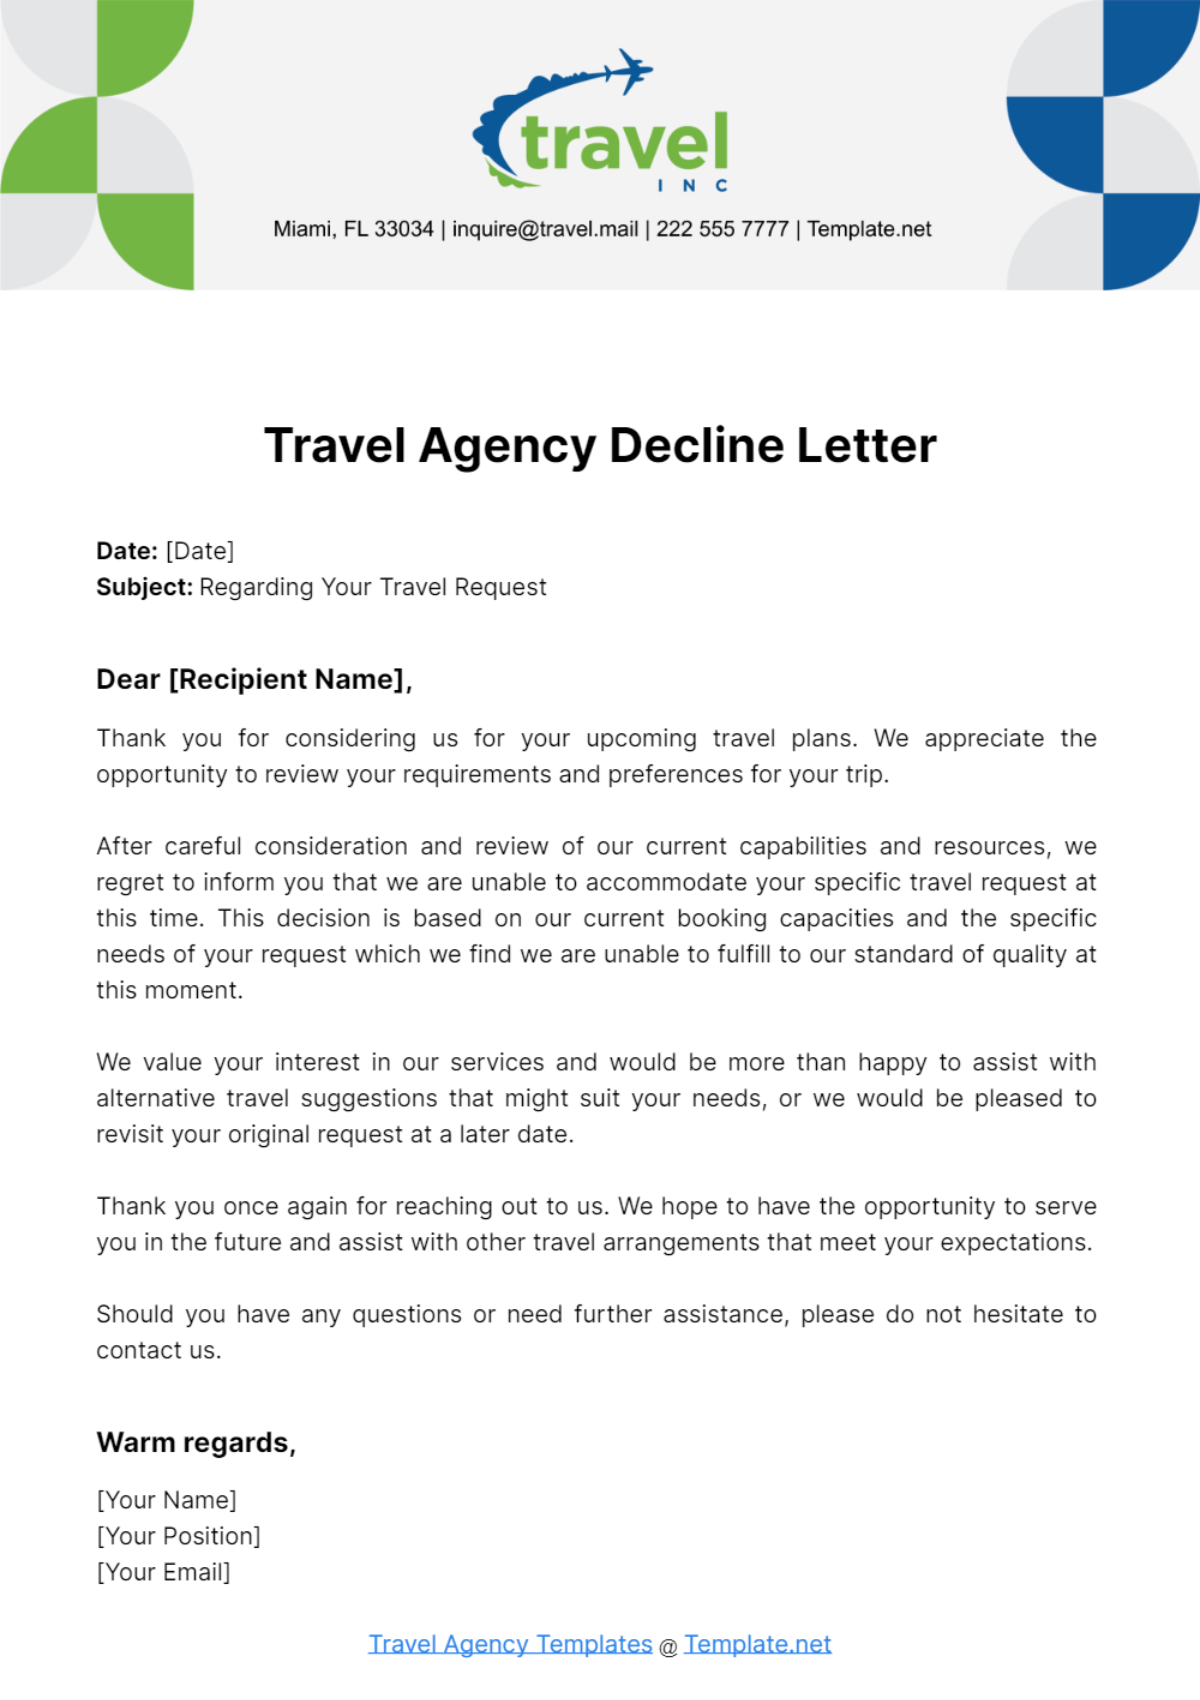 Travel Agency Decline Letter Template